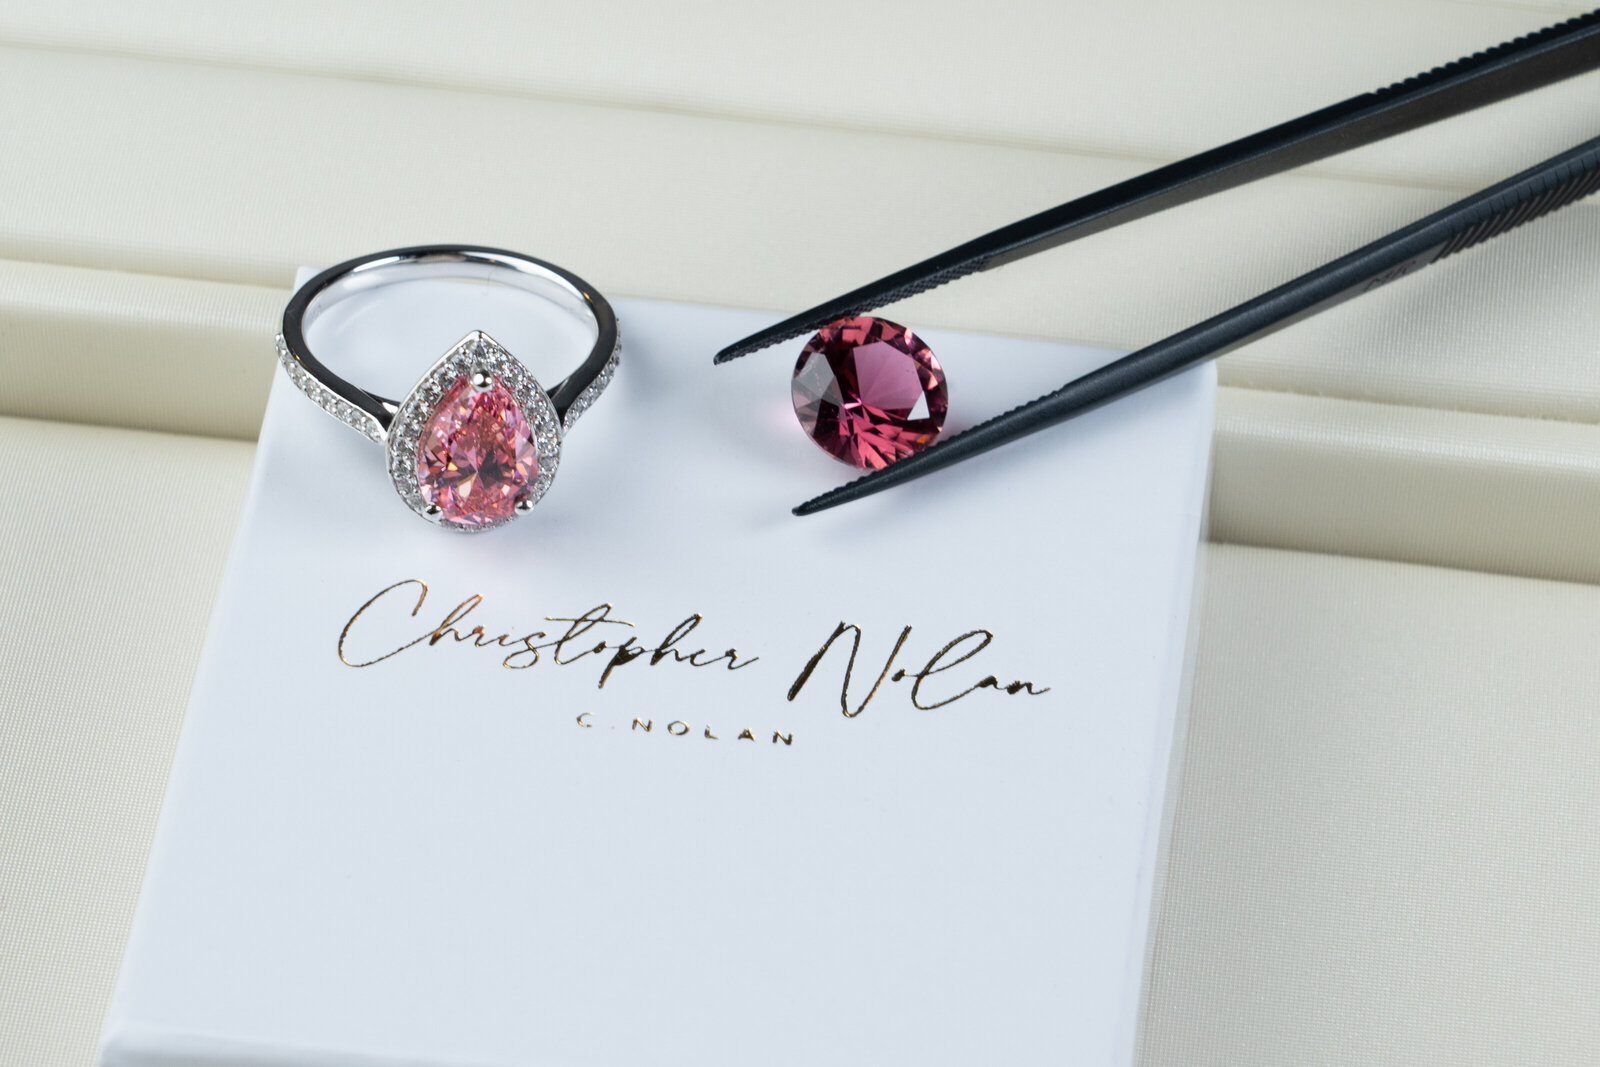 Christopher Nolan brings you the finest gemstone offerings